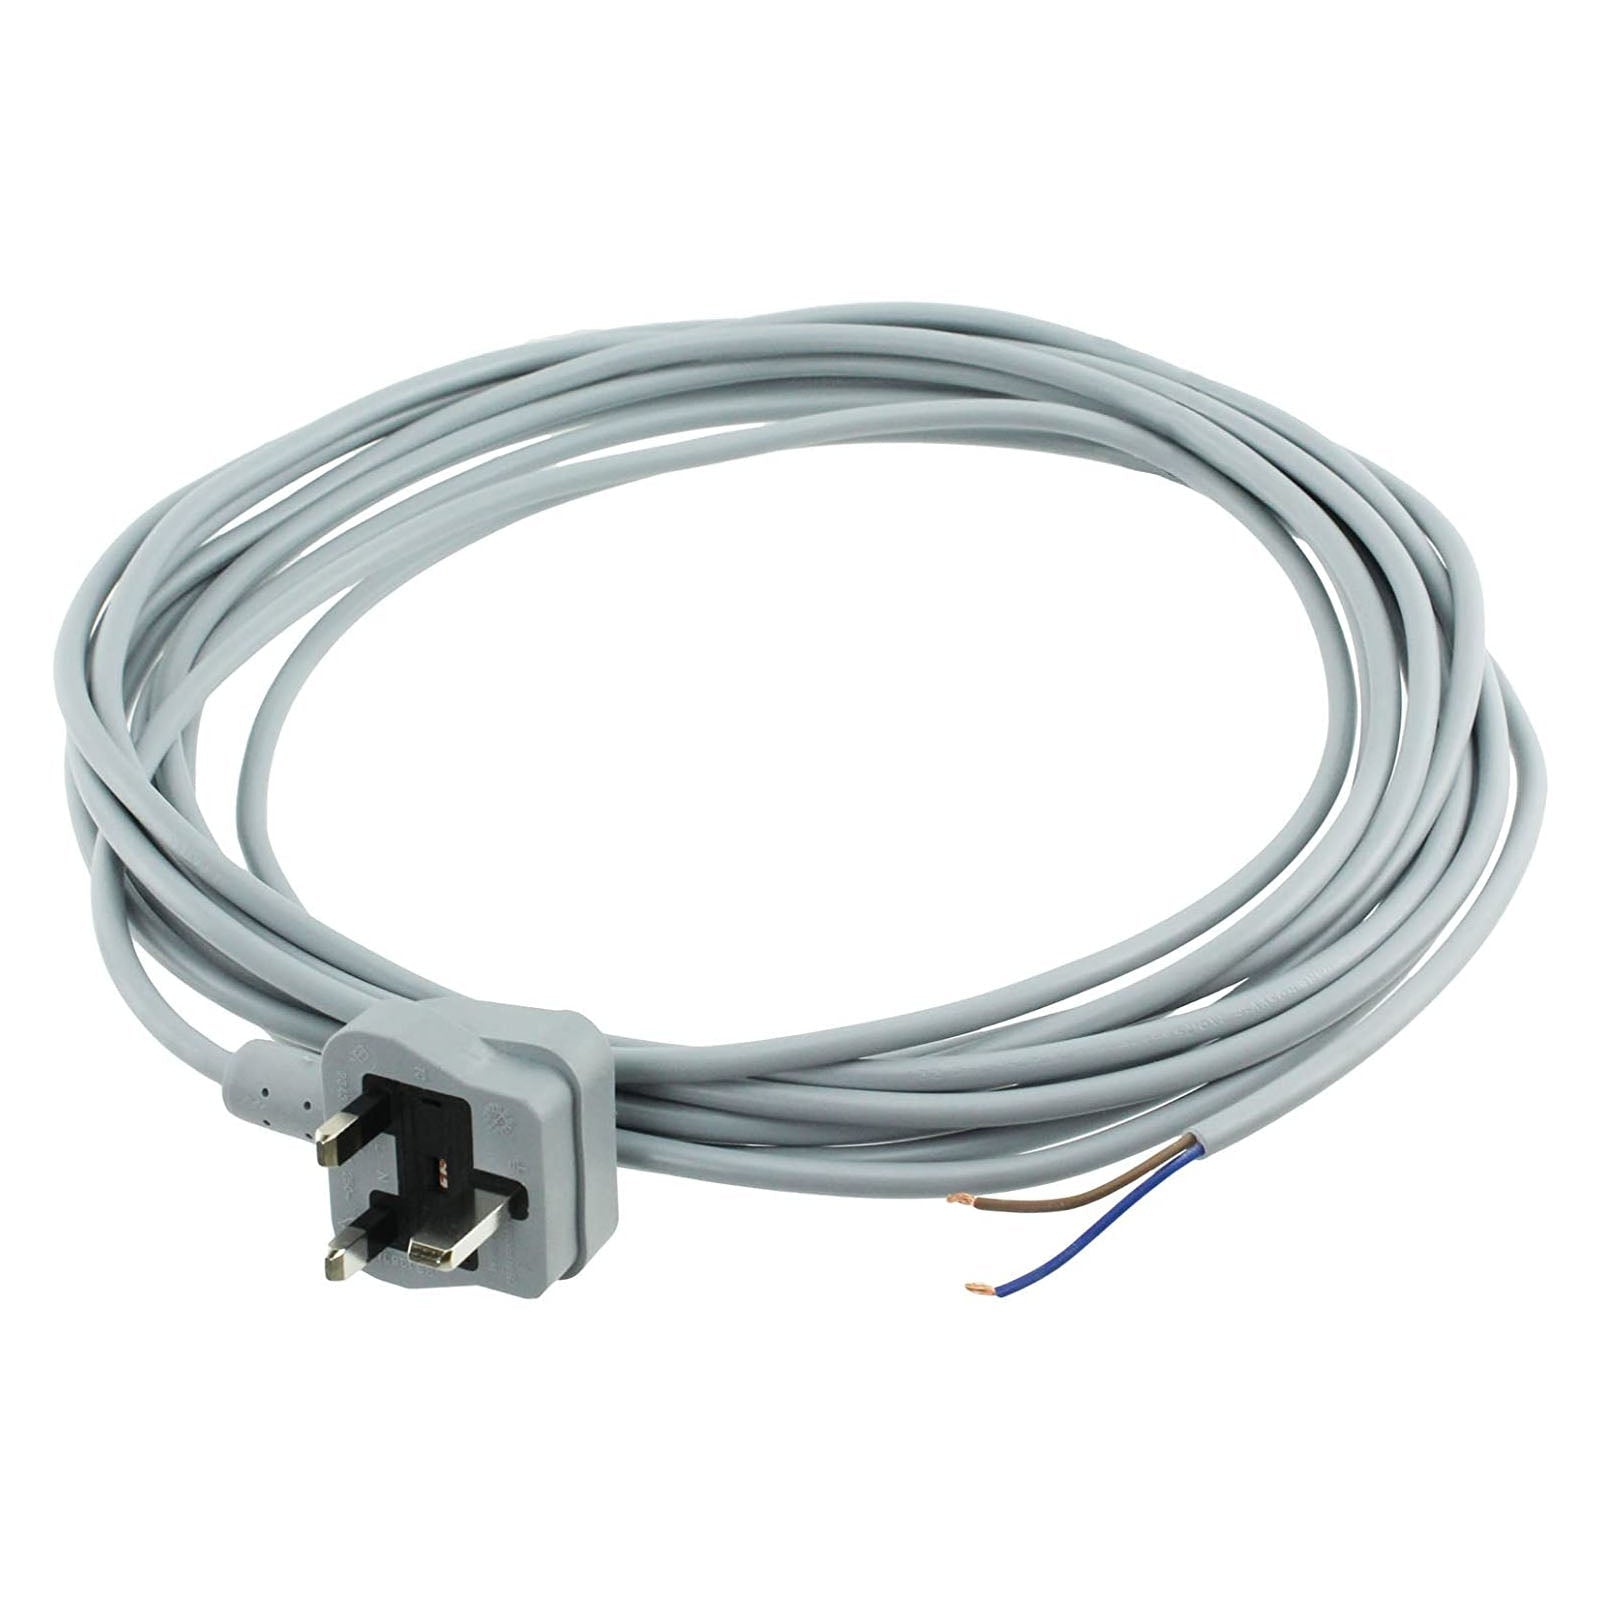 Mains Cable for ZANUSSI Vacuum Cleaner Hoover Lead Grey 8M Replacement